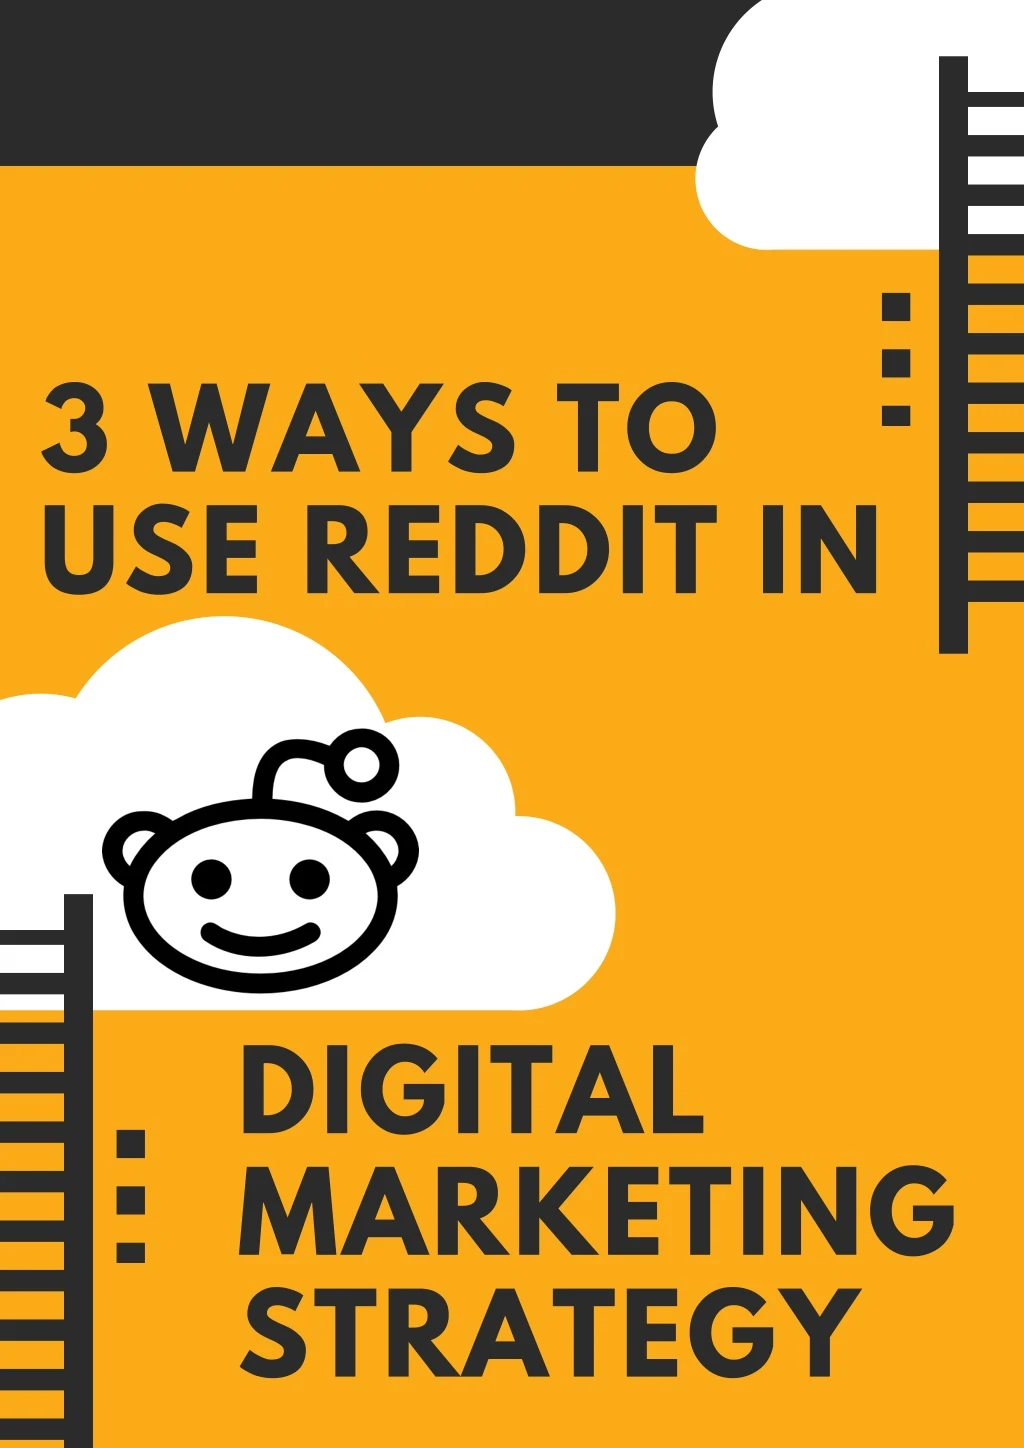 3 ways to use reddit in